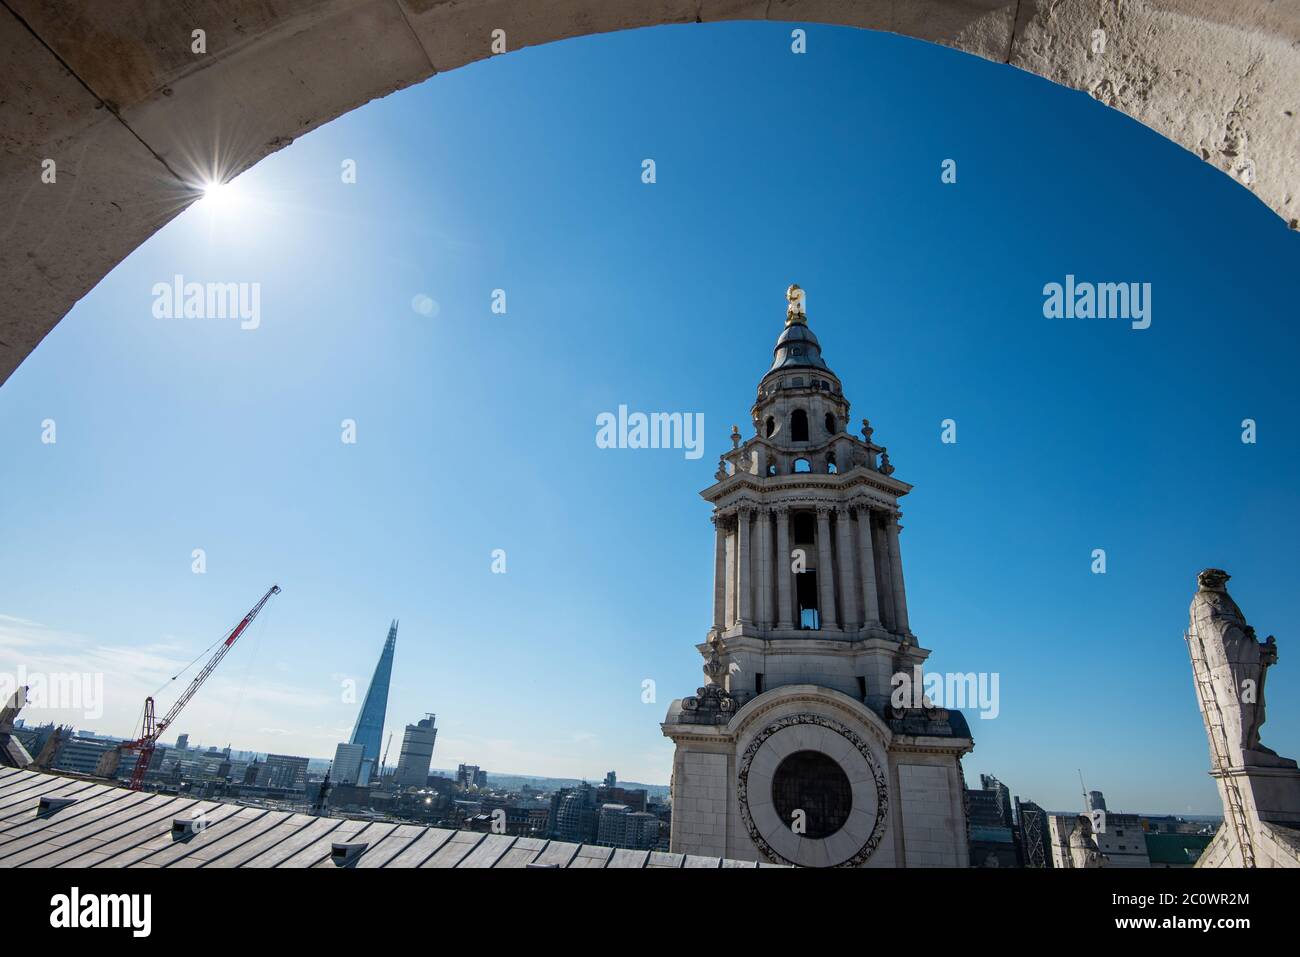 St Paul's Cathedral, London, England. One of the clock towers. Stock Photo